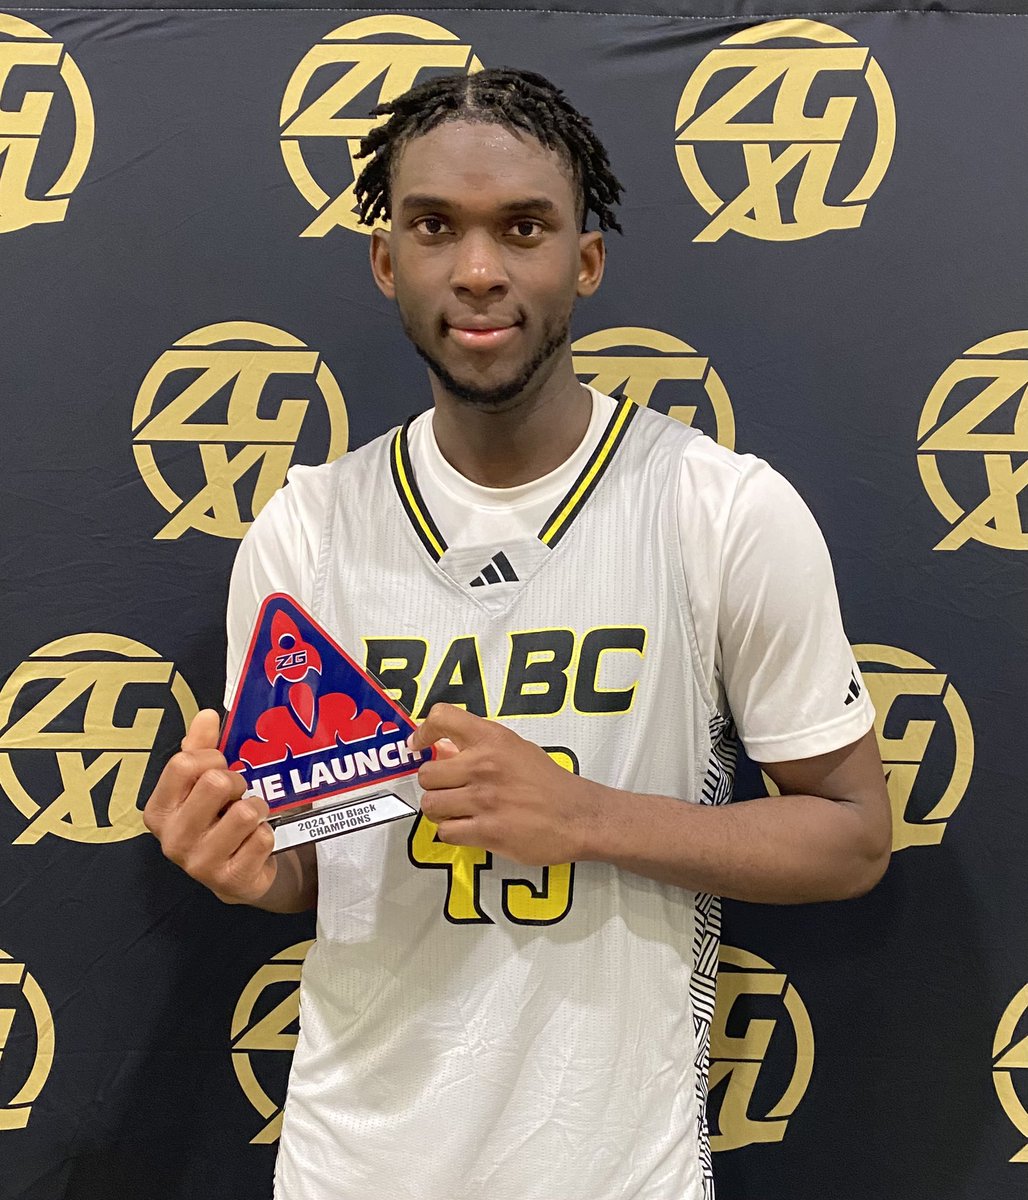 Providence-commit Oswin Erhunmwunse helped power @thebabc to a title here at the launch. Erhunmwunse’s defensive abilities have earned him national spotlight, and his blocking skills were on full display today. He made highlight-reel pins on the backboard and a ton of finishes